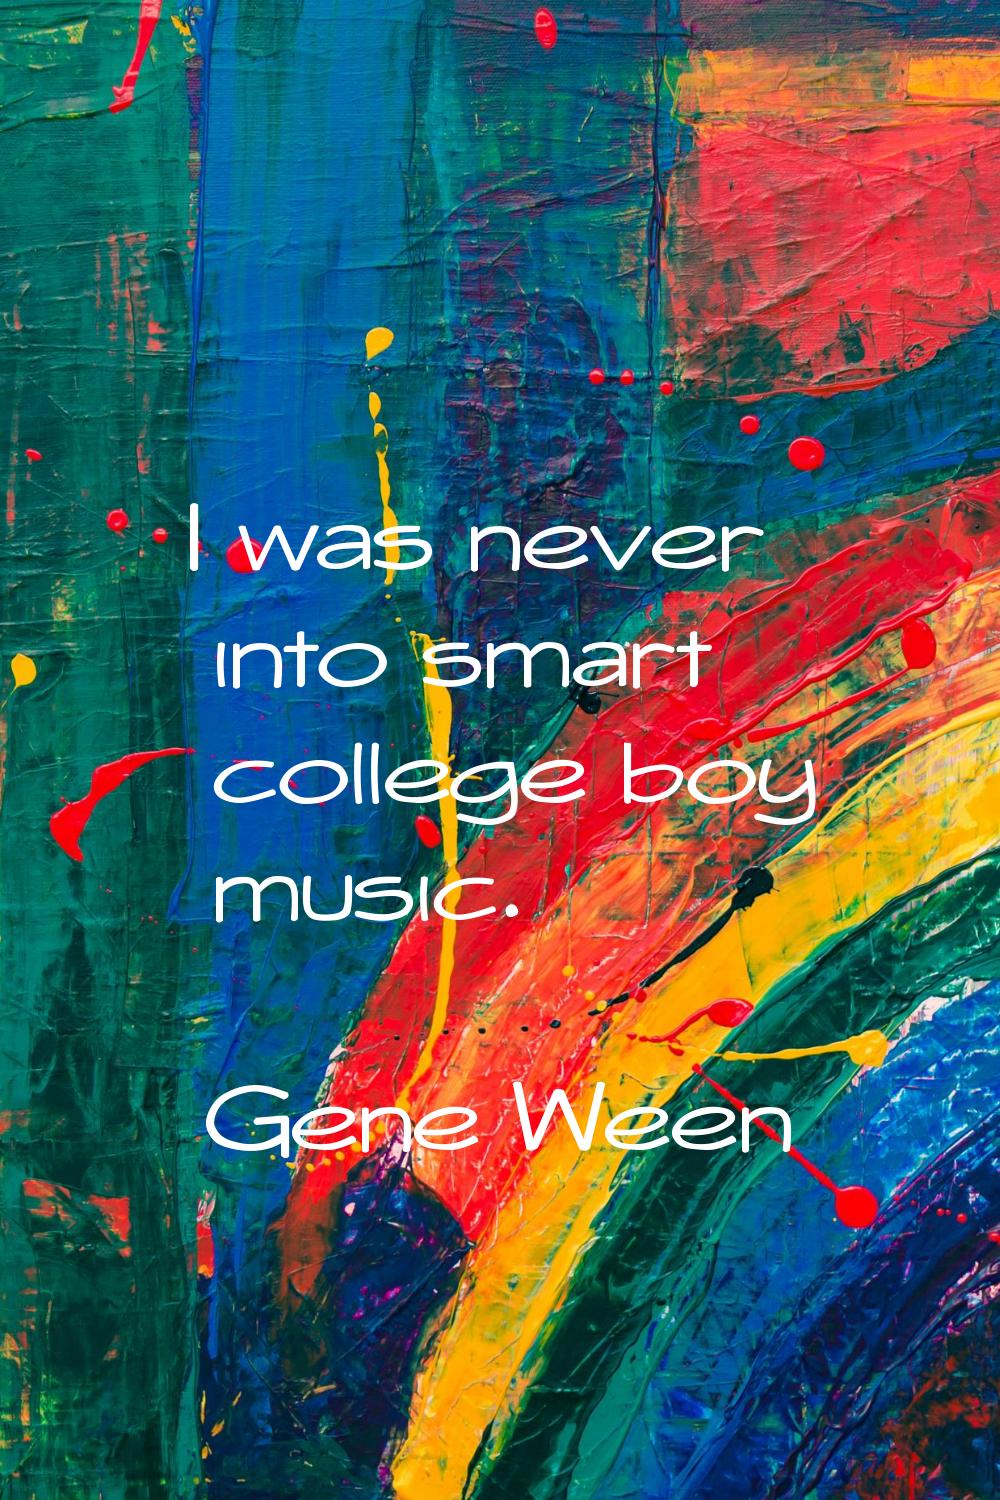 I was never into smart college boy music.